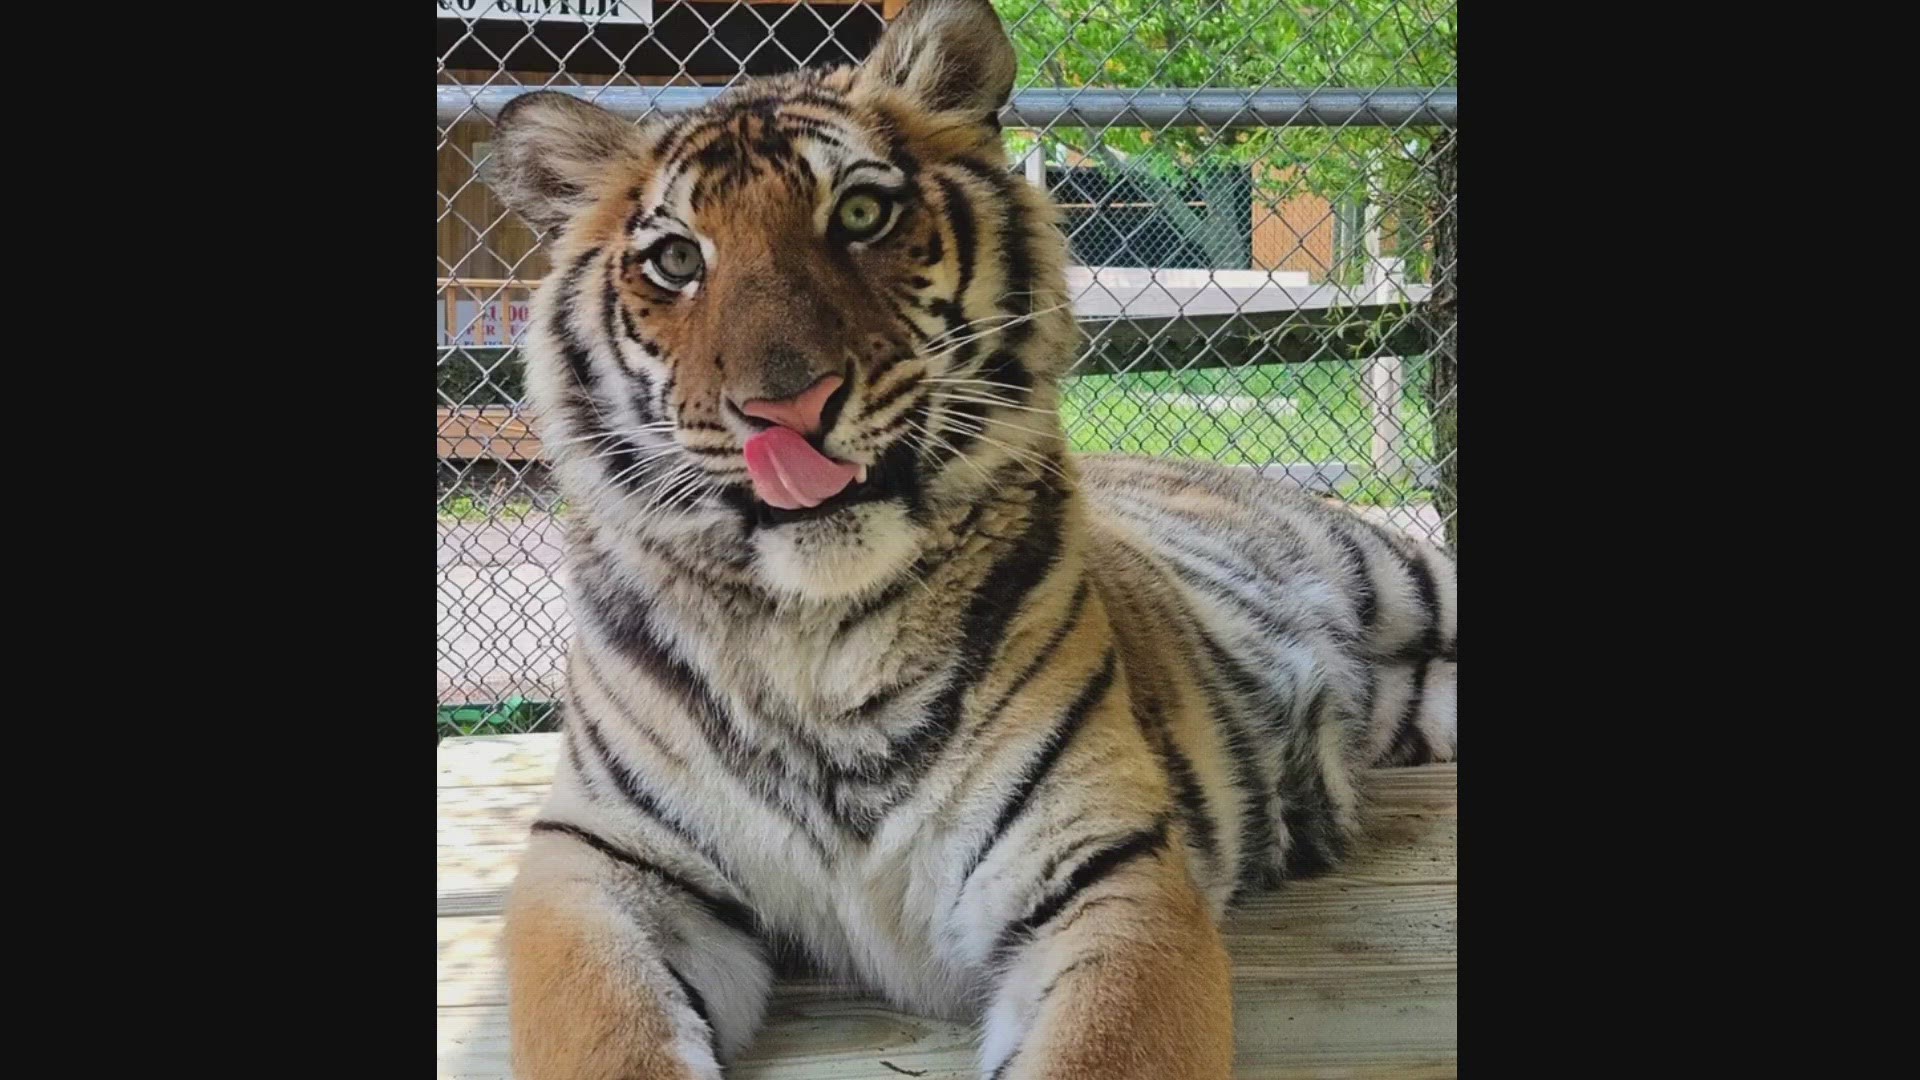 York's Wild Animal Kingdom has a new tiger, and they're looking for a name. The zoo is taking suggestions over Facebook.